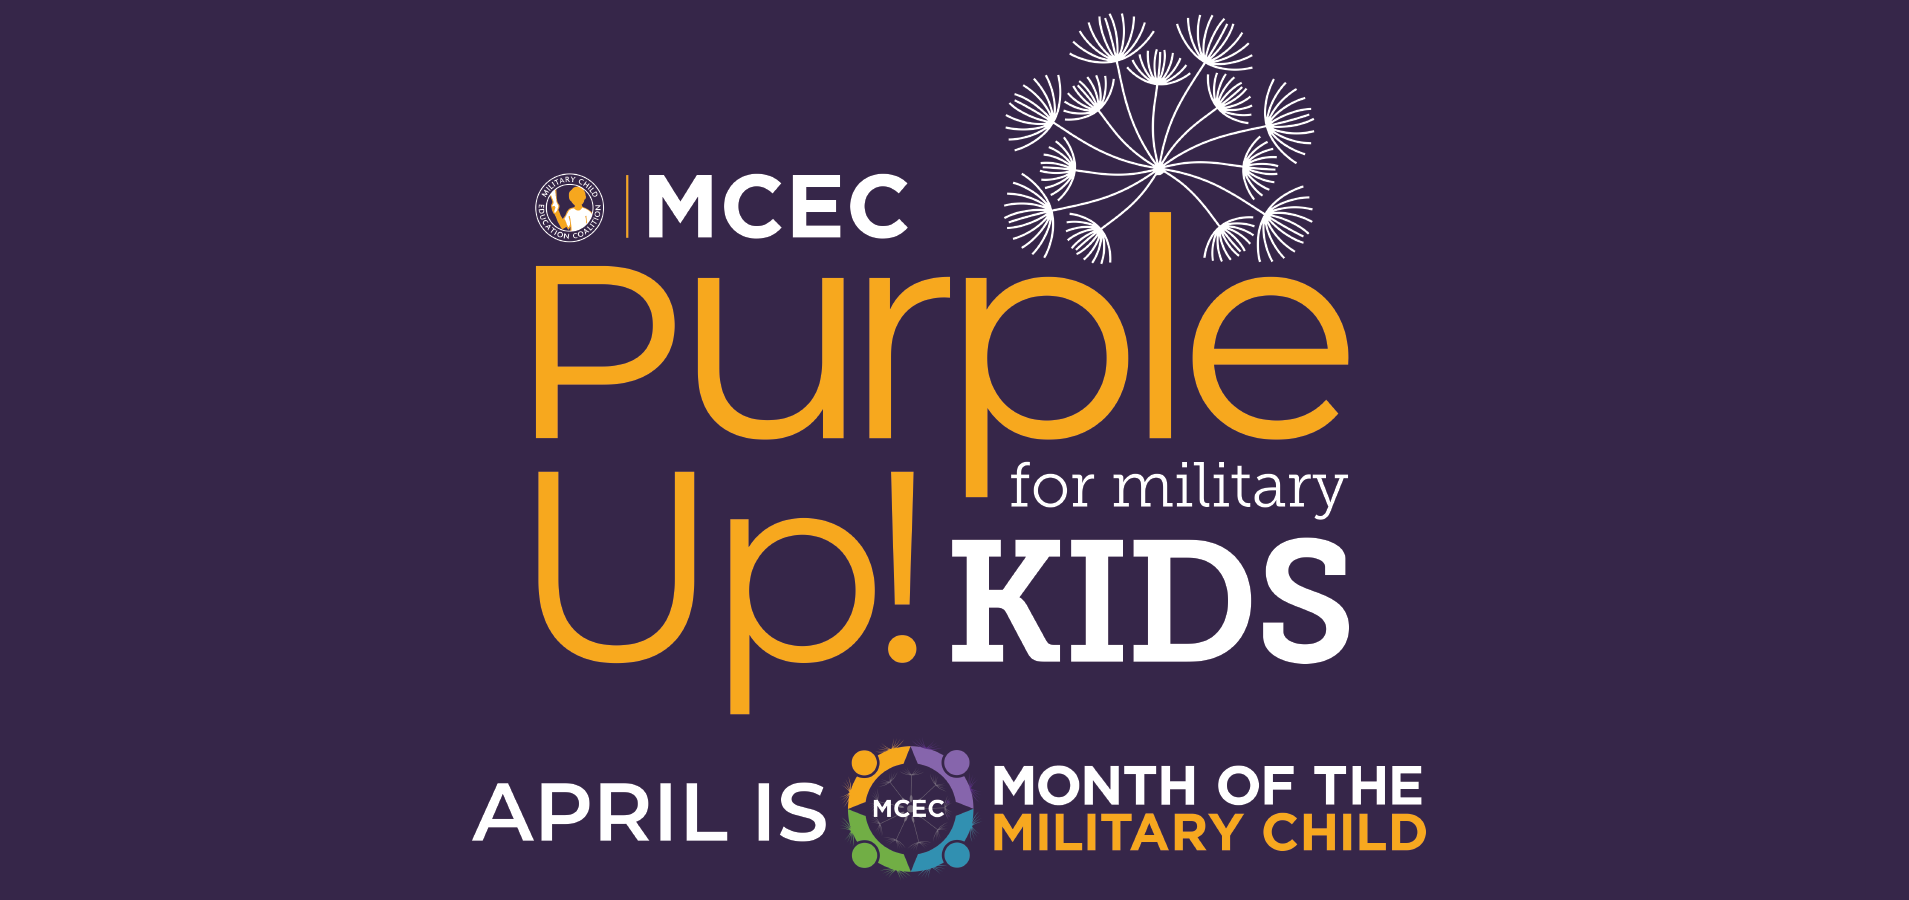 April is the Month of the Military Child, presented by the Military Child Education Coalition